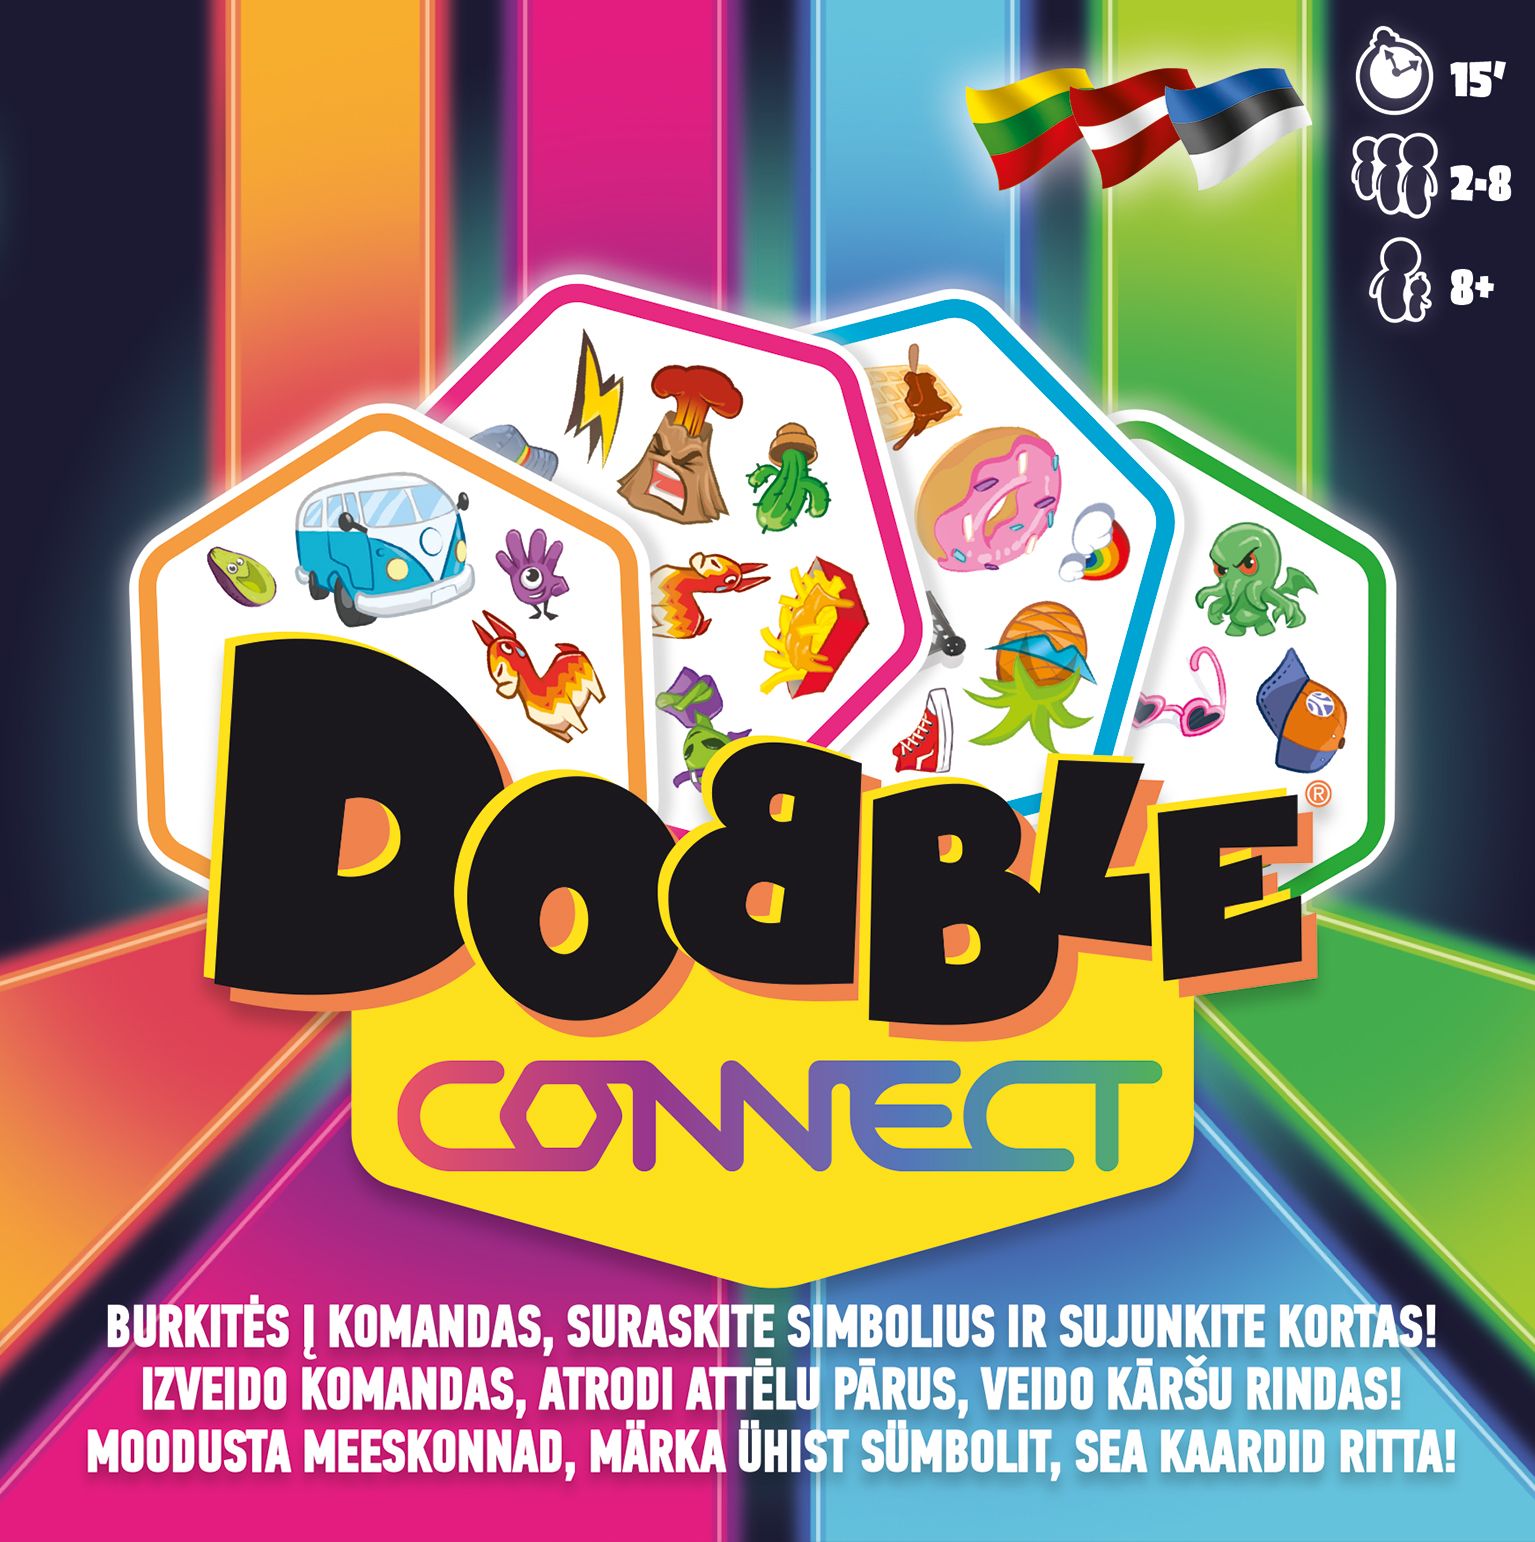 Board Game Dobble Connect | Posters, Gifts, Merchandise | Europosters